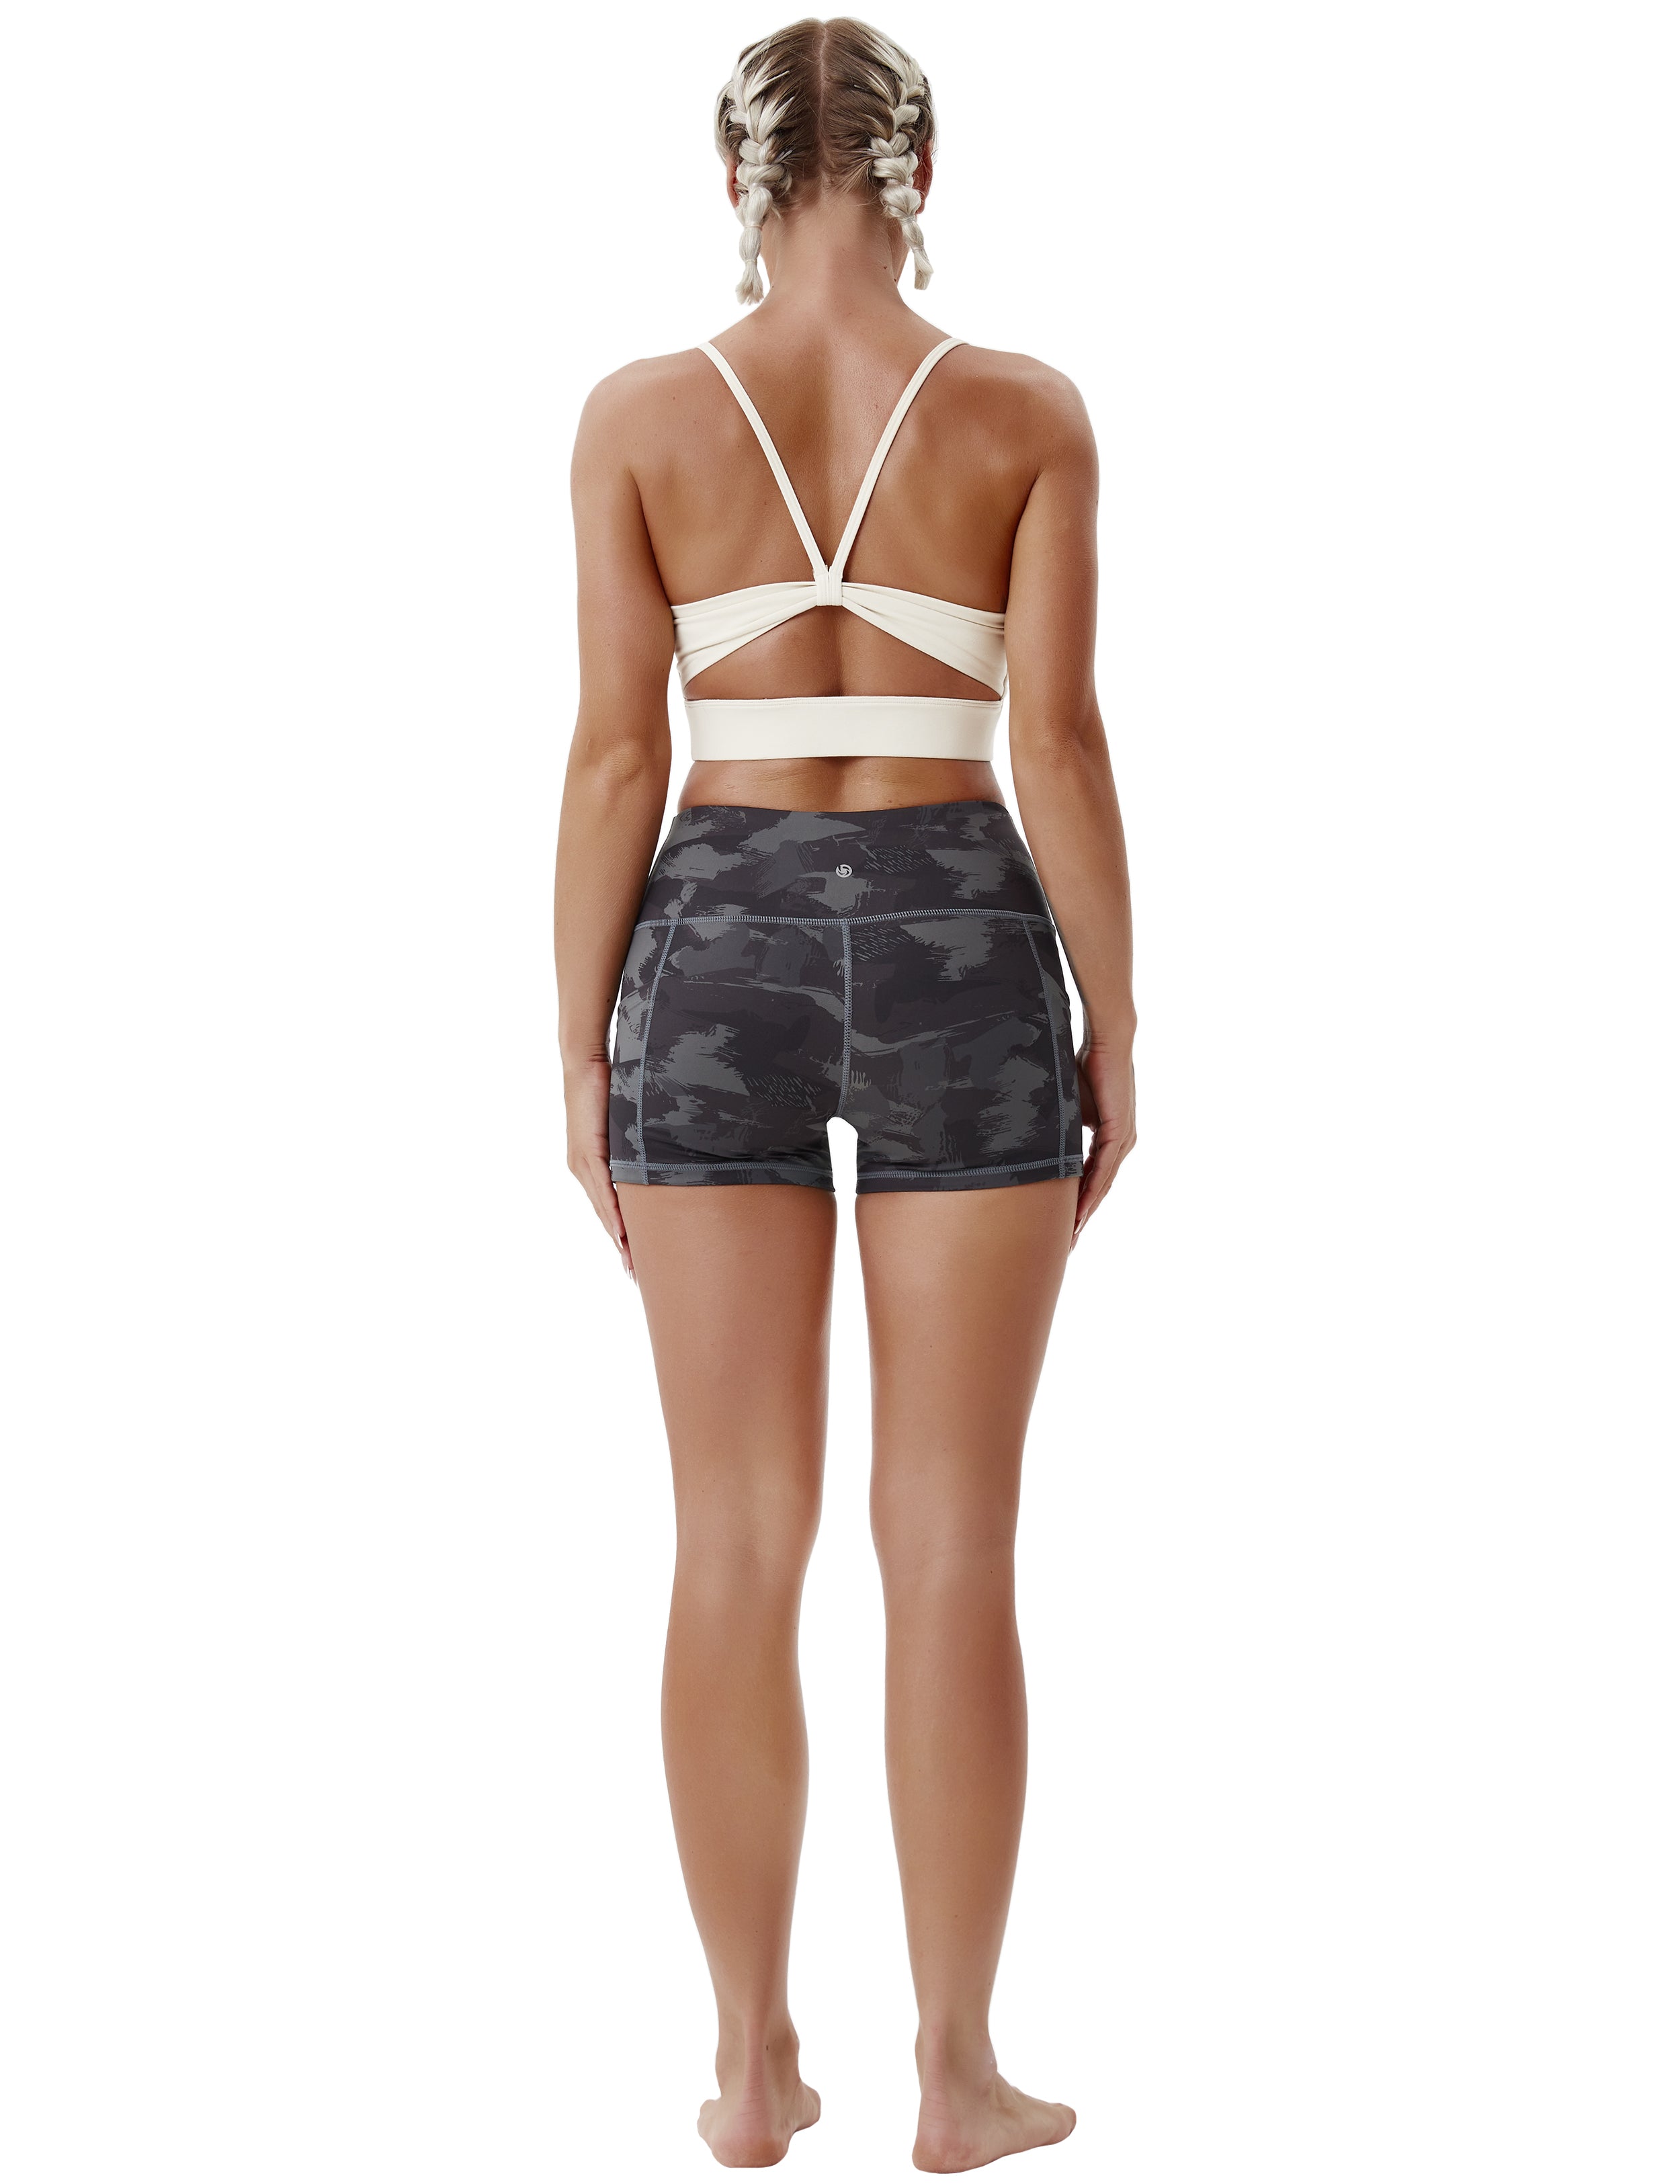 2.5" Printed Side Pockets Yoga Shorts dimgray brushcamo Sleek, soft, smooth and totally comfortable: our newest sexy style is here. Softest-ever fabric High elasticity High density 4-way stretch Fabric doesn't attract lint easily No see-through Moisture-wicking Machine wash 78% Polyester, 22% Spandex